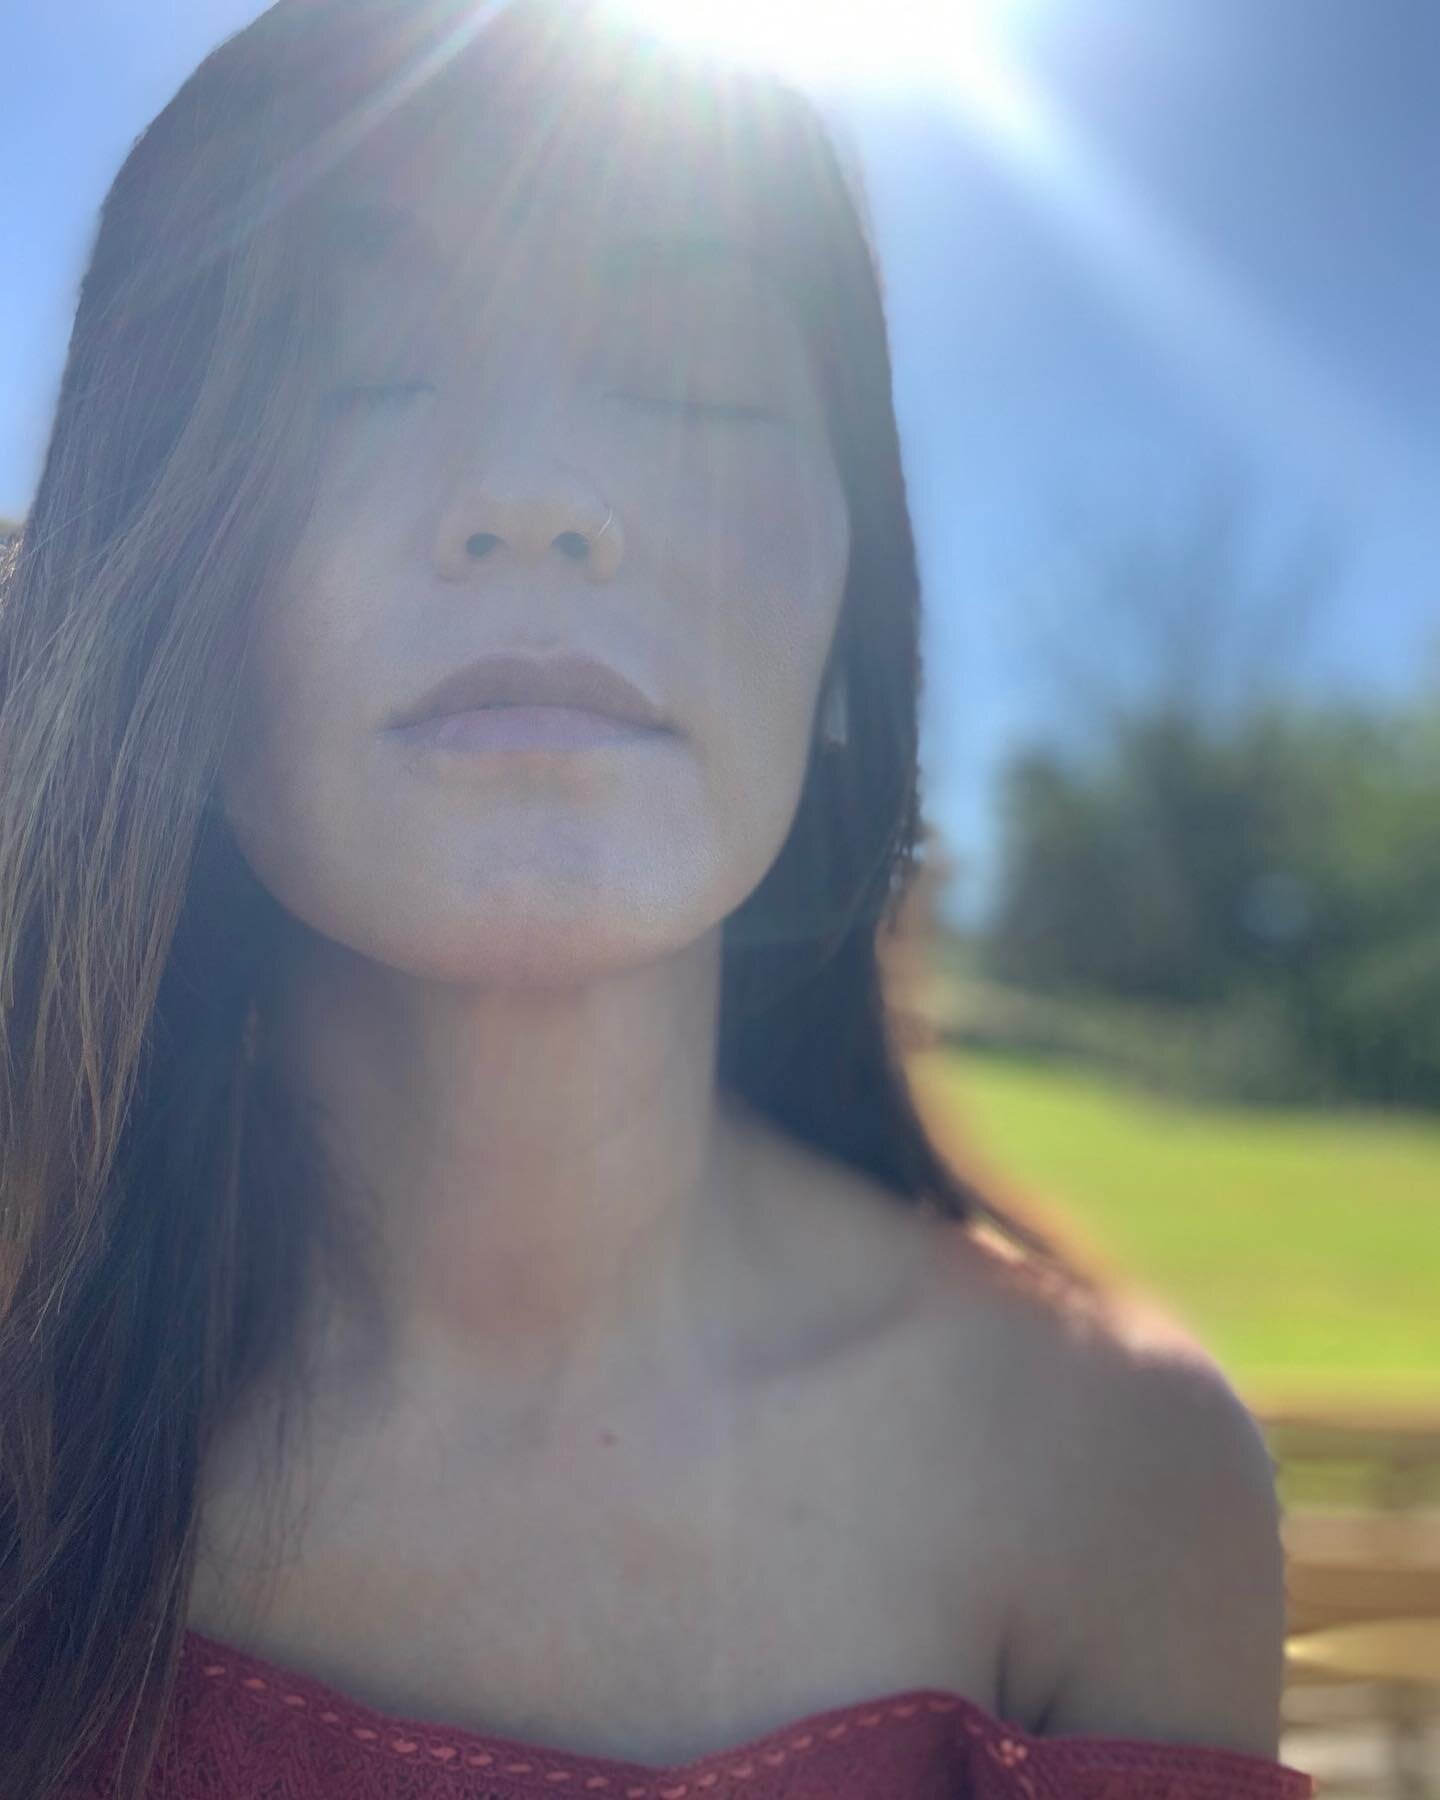 Feelin&rsquo; all the feels this bod blesses me with. 

Day by day
Night by night
This is my home

Know her
Love her 
Allow her to feel

the sun kisses
the breeze on my neck
the earth holding me

💗 Embodiment has been such a pleasure to weave more i